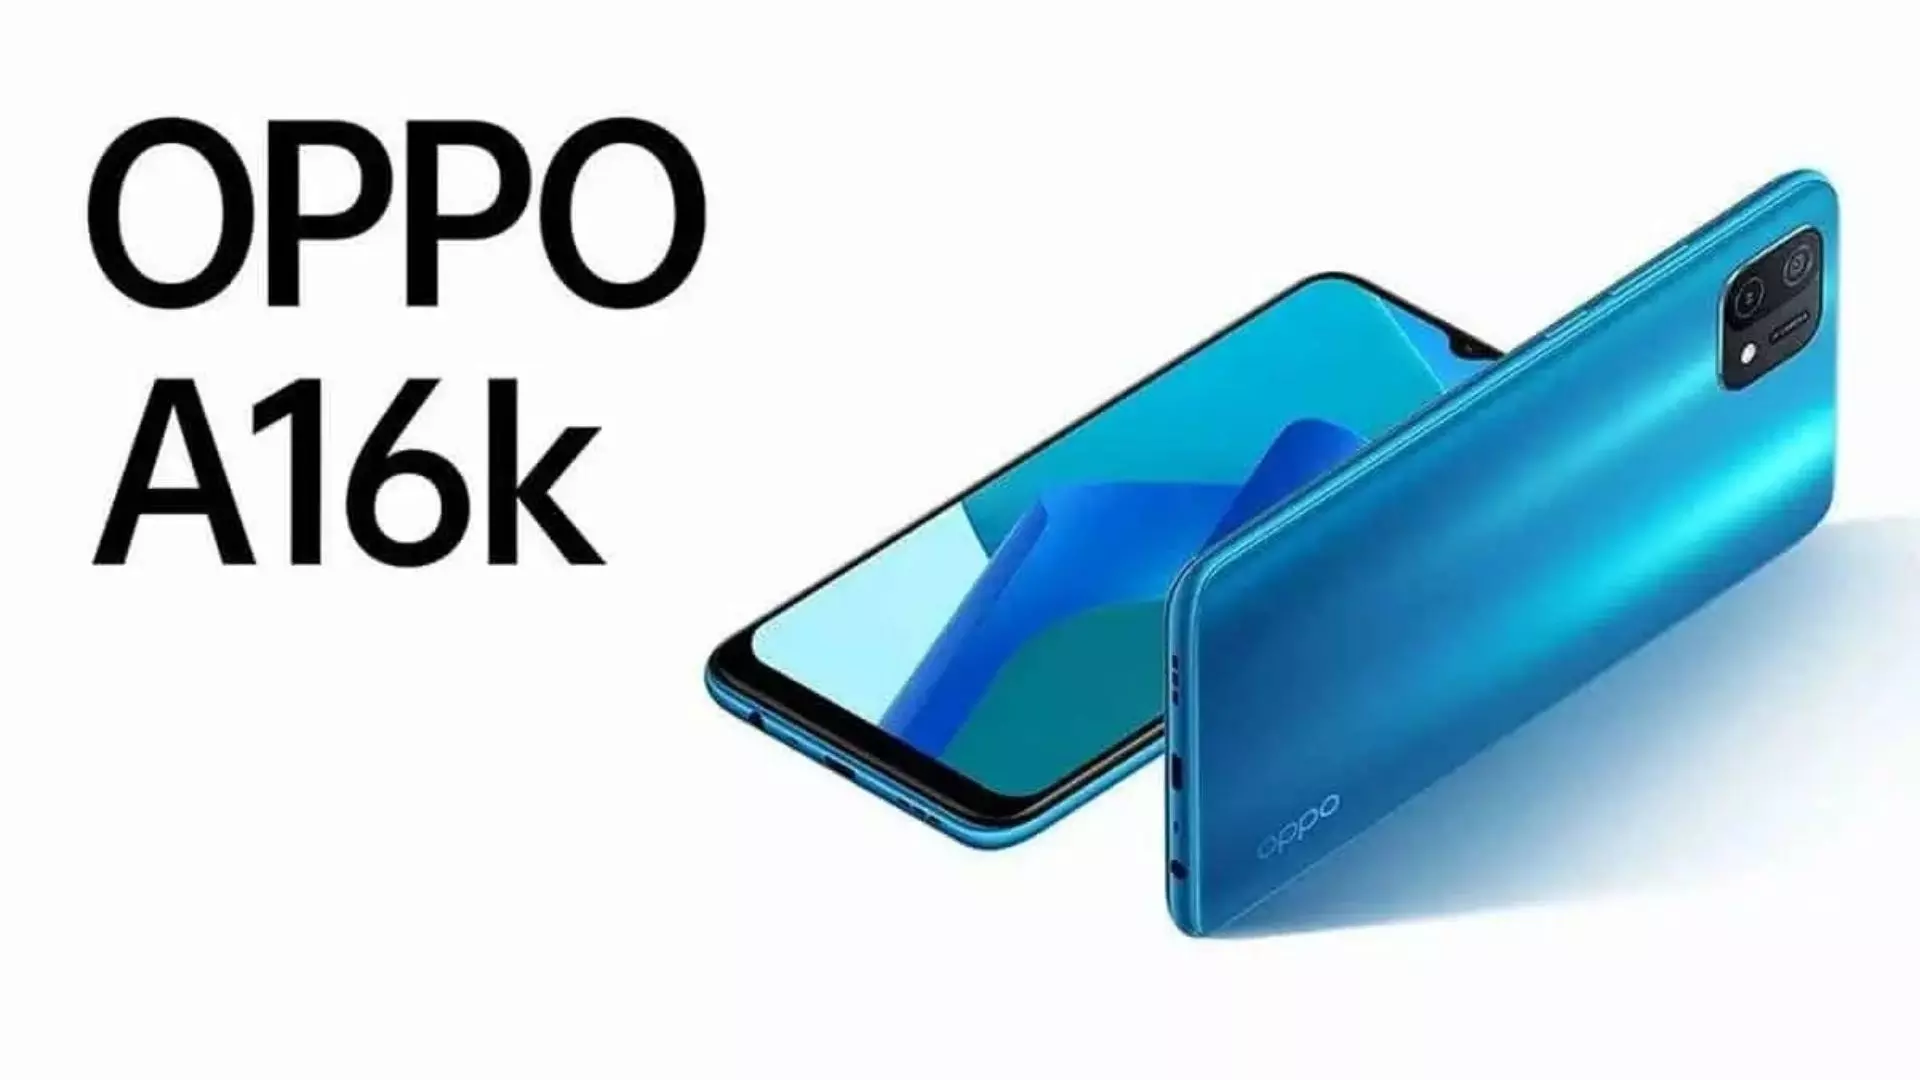 Oppo Launched Oppo A16K New Smart Phone Model With Specifications and Price